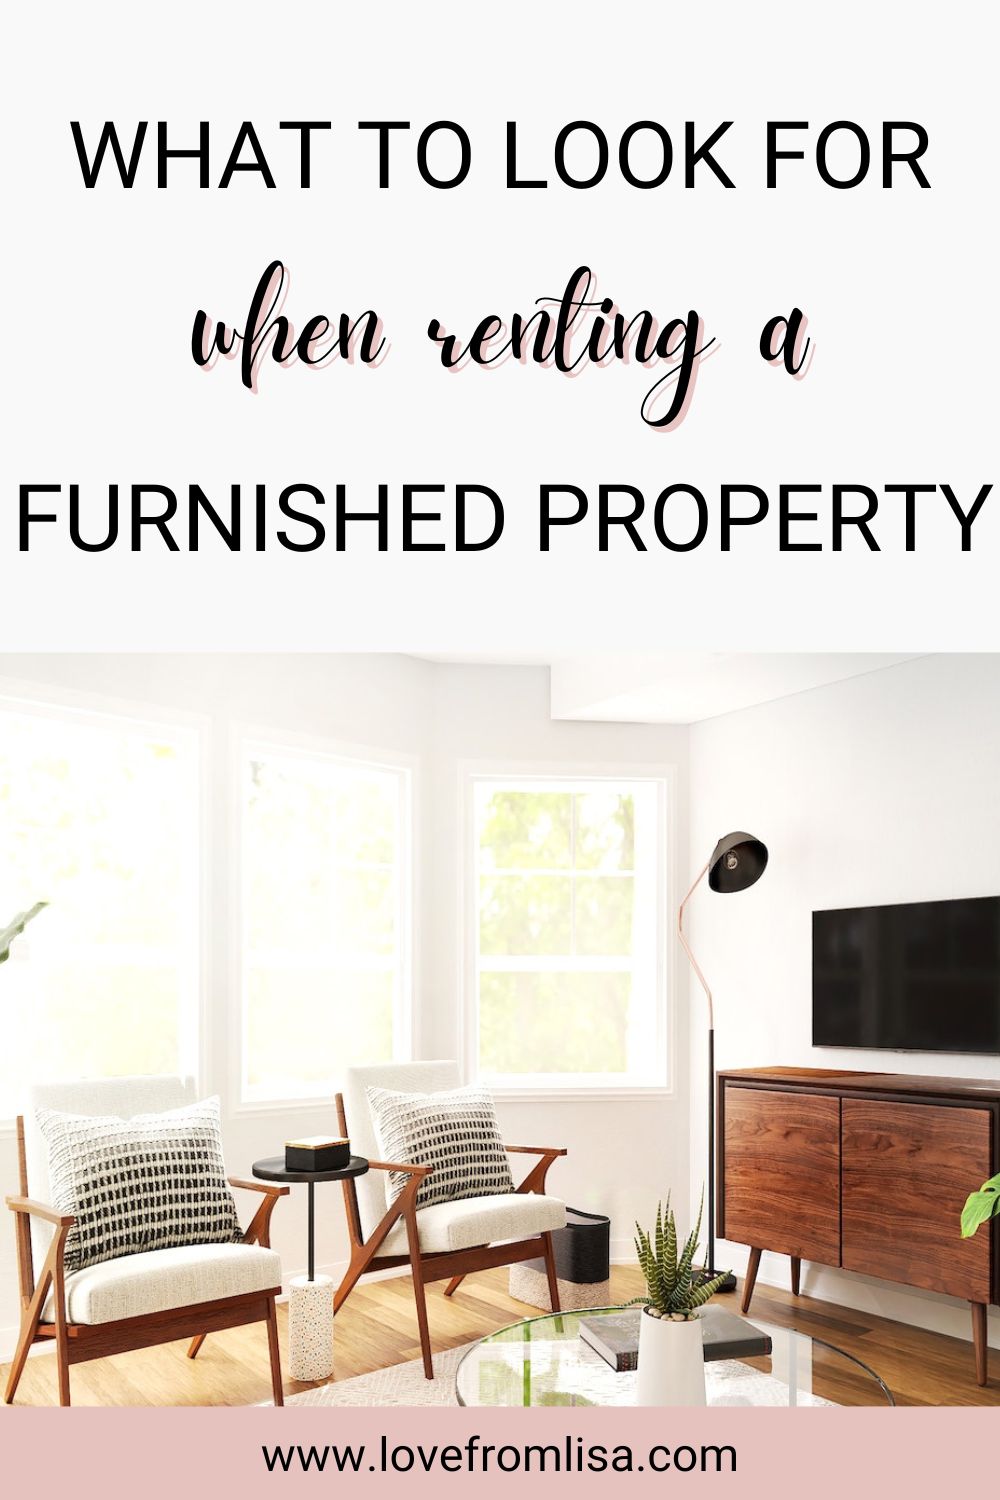 What to look for when renting a furnished property Pinterest graphic